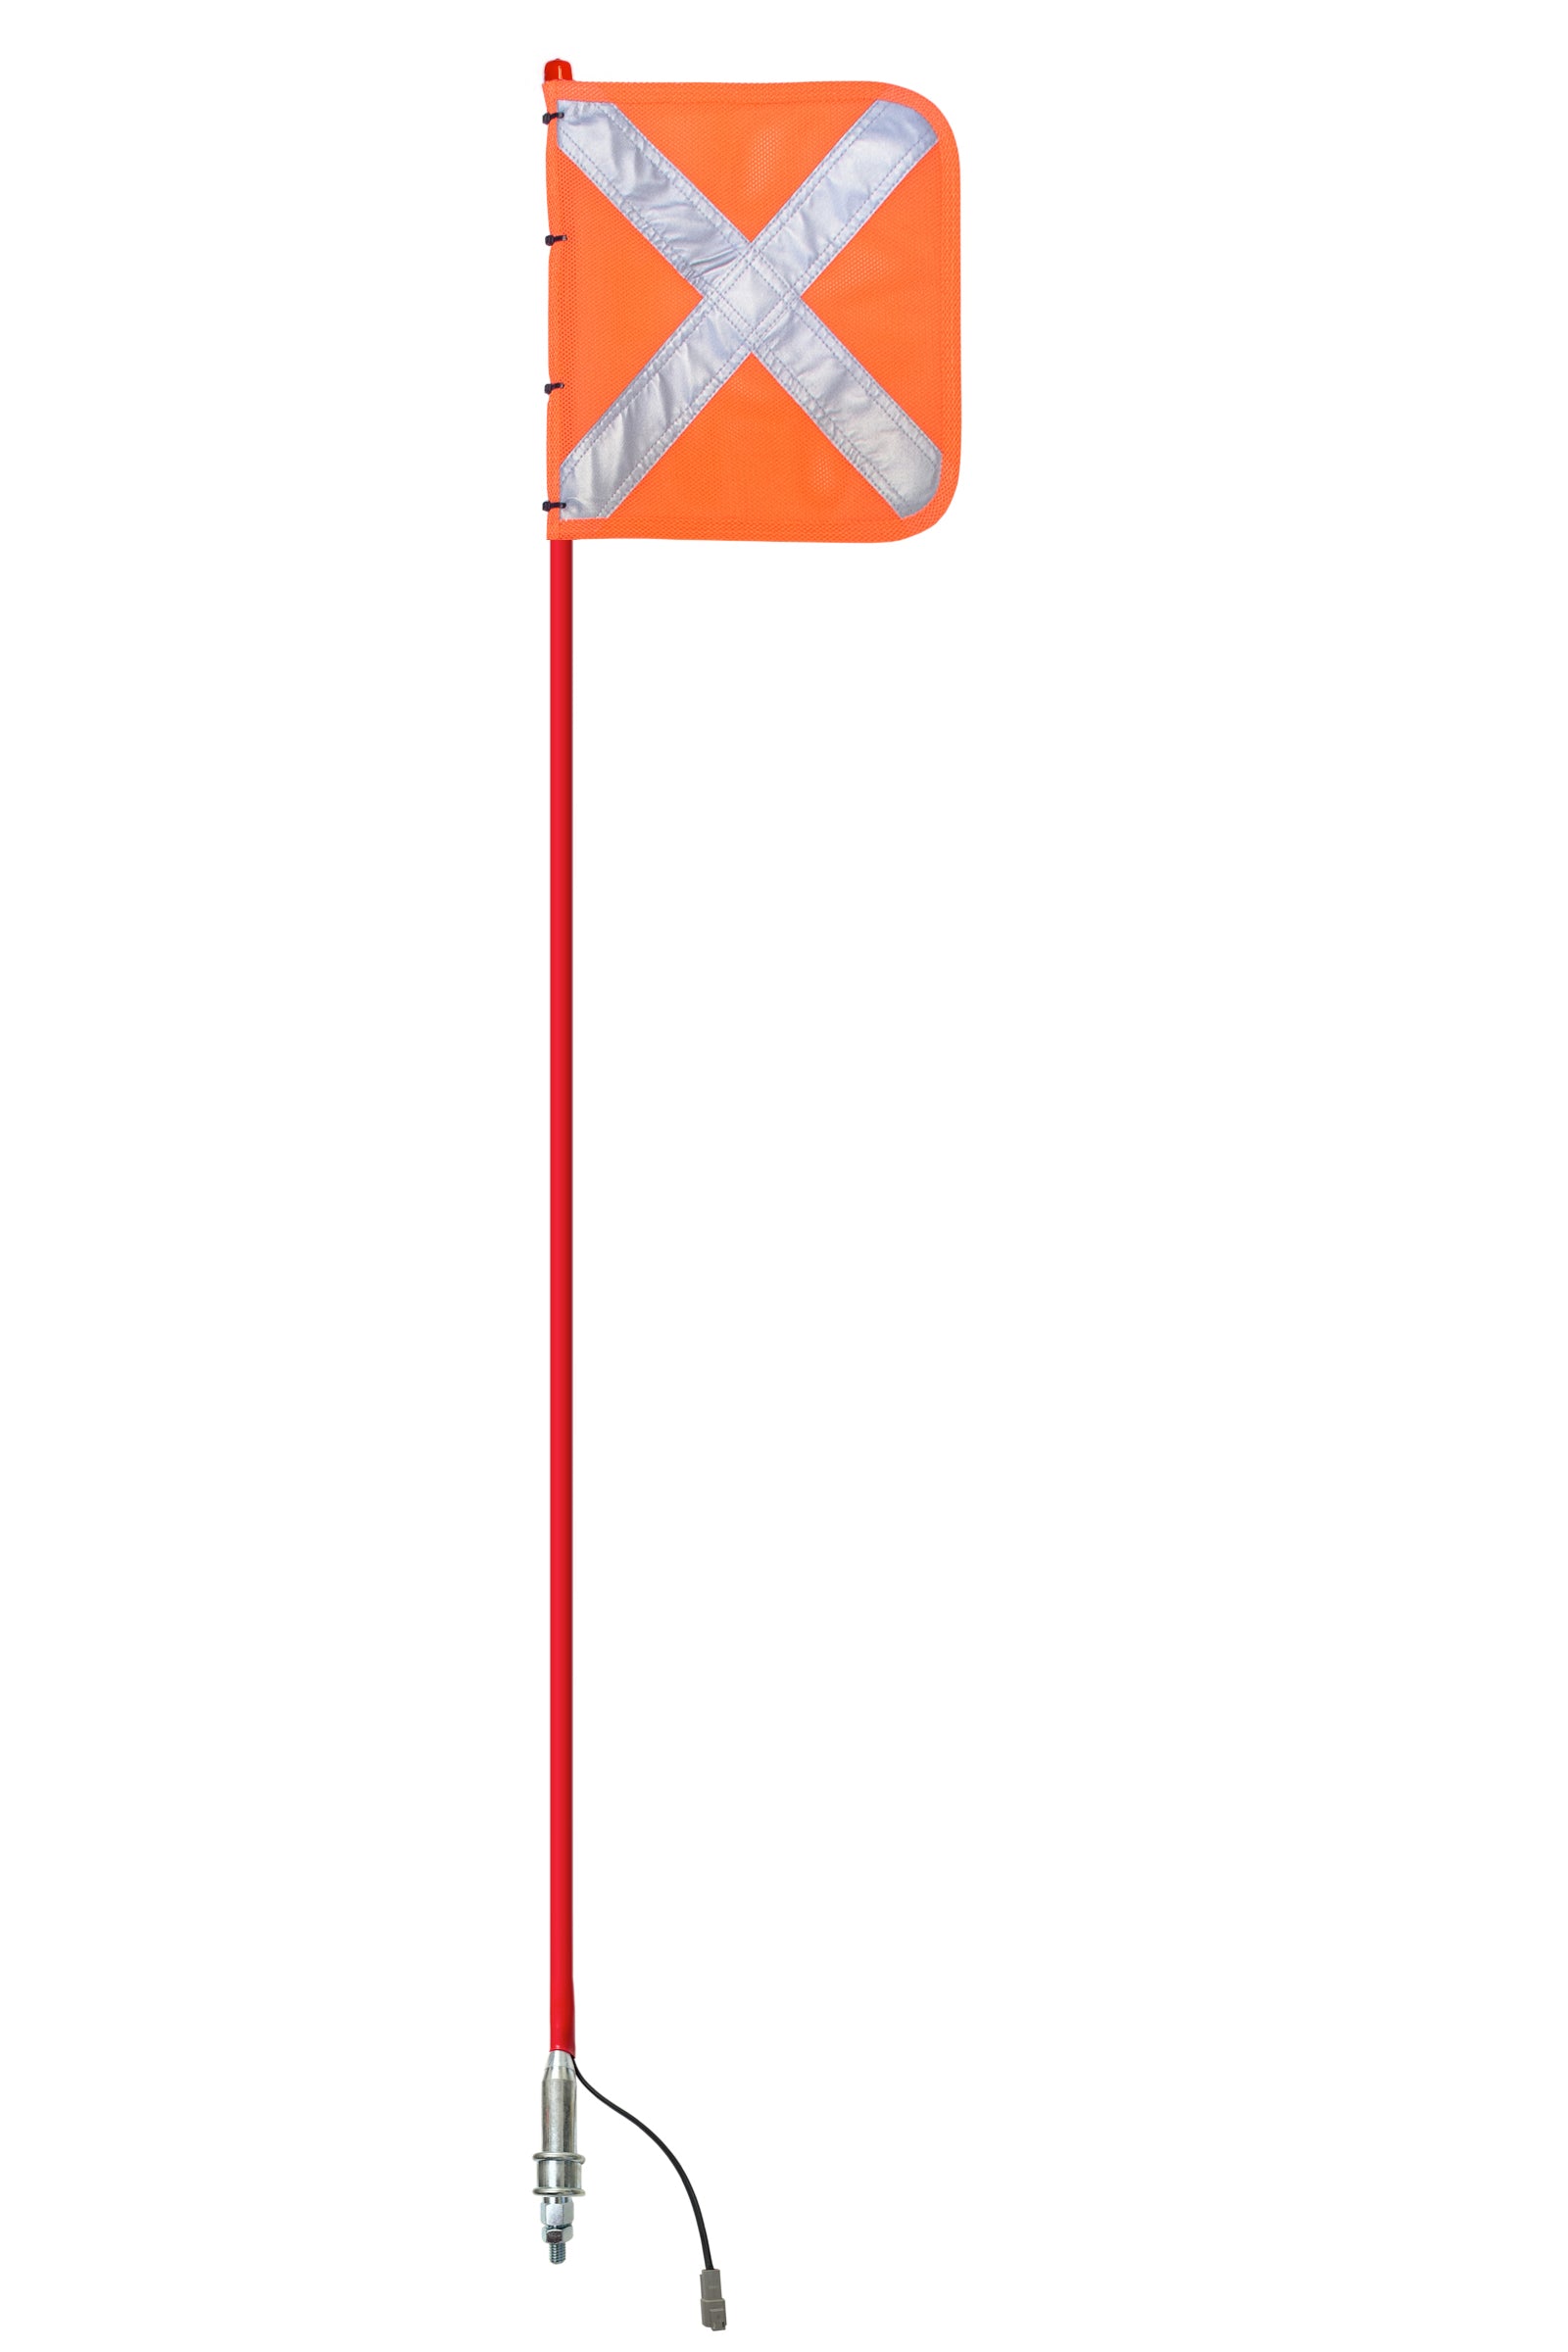 Buggy whip with an attached safety flag in the off position, designed to enhance the visibility and safety of off-road vehicles, featuring a durable and flexible build.